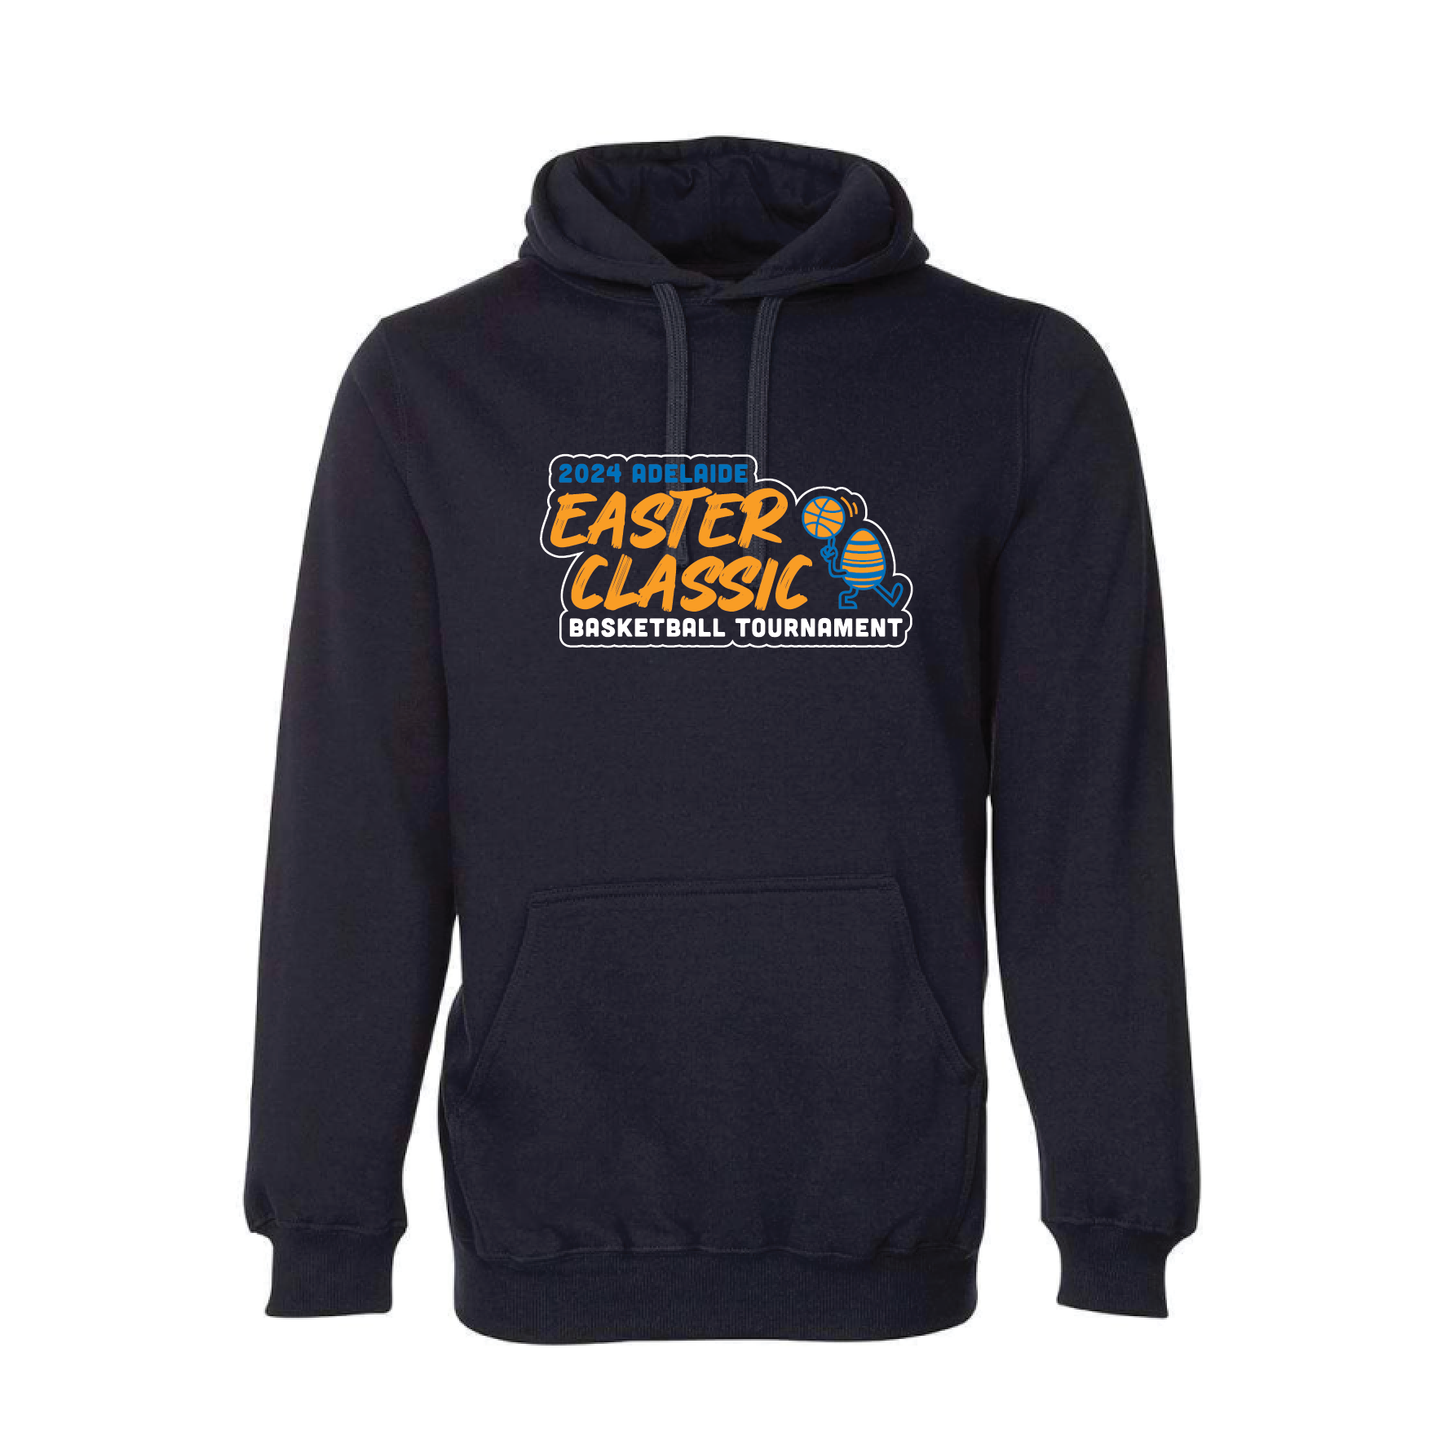 EASTER CLASSIC HOODED SWEAT NAVY TEAM AND INDIVIDUAL PLAYER NAMES ON BACK (MIN QTY 8+)